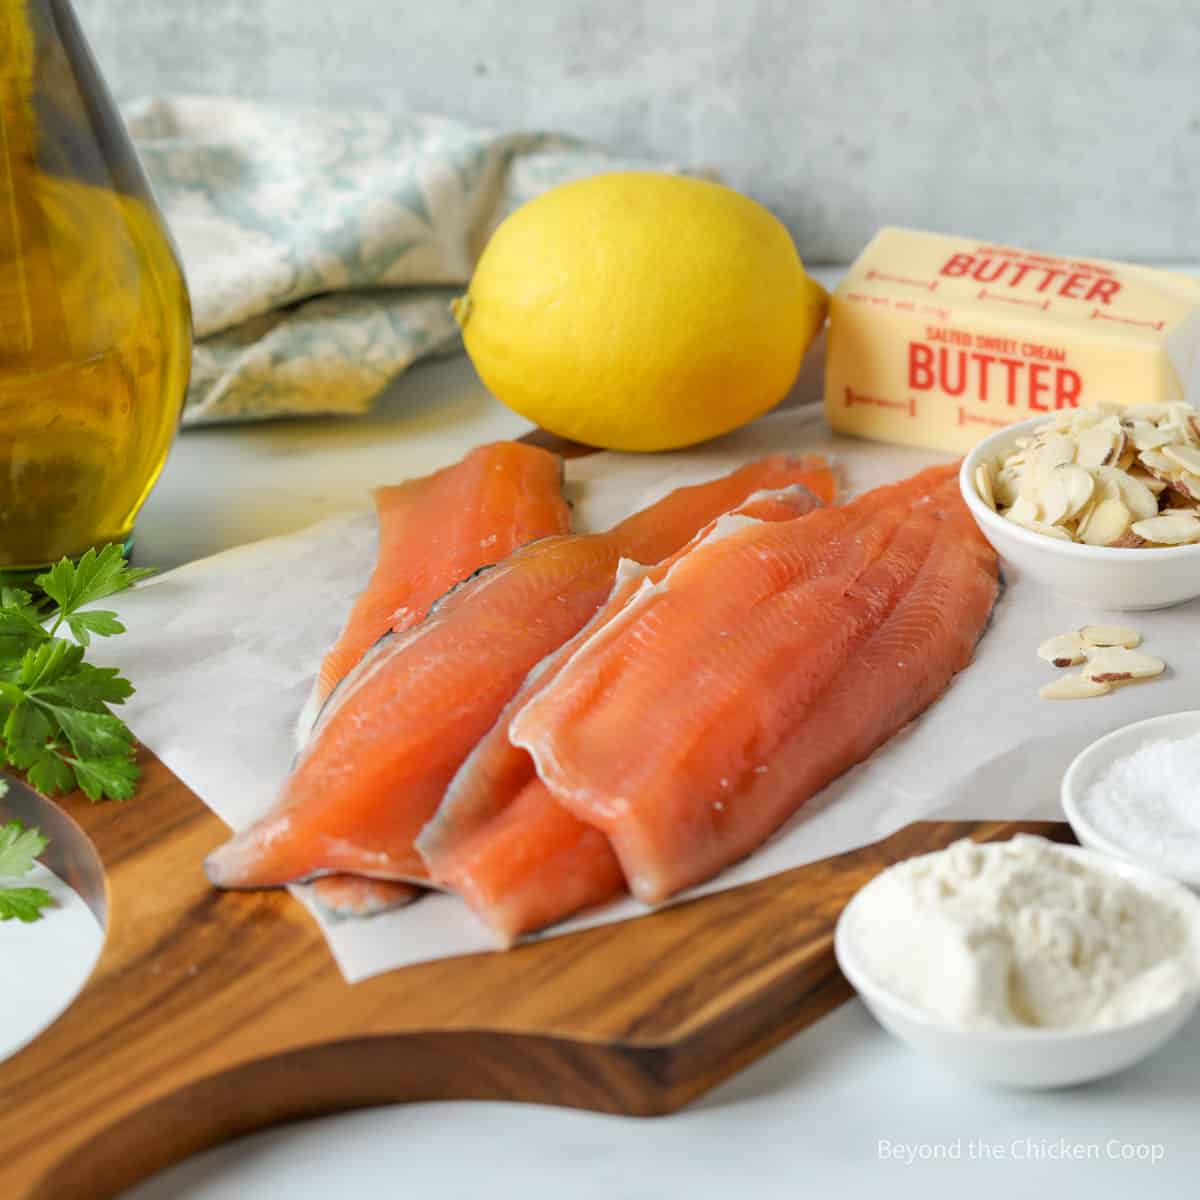 Rainbow trout fillet on a board near butter and a lemon.